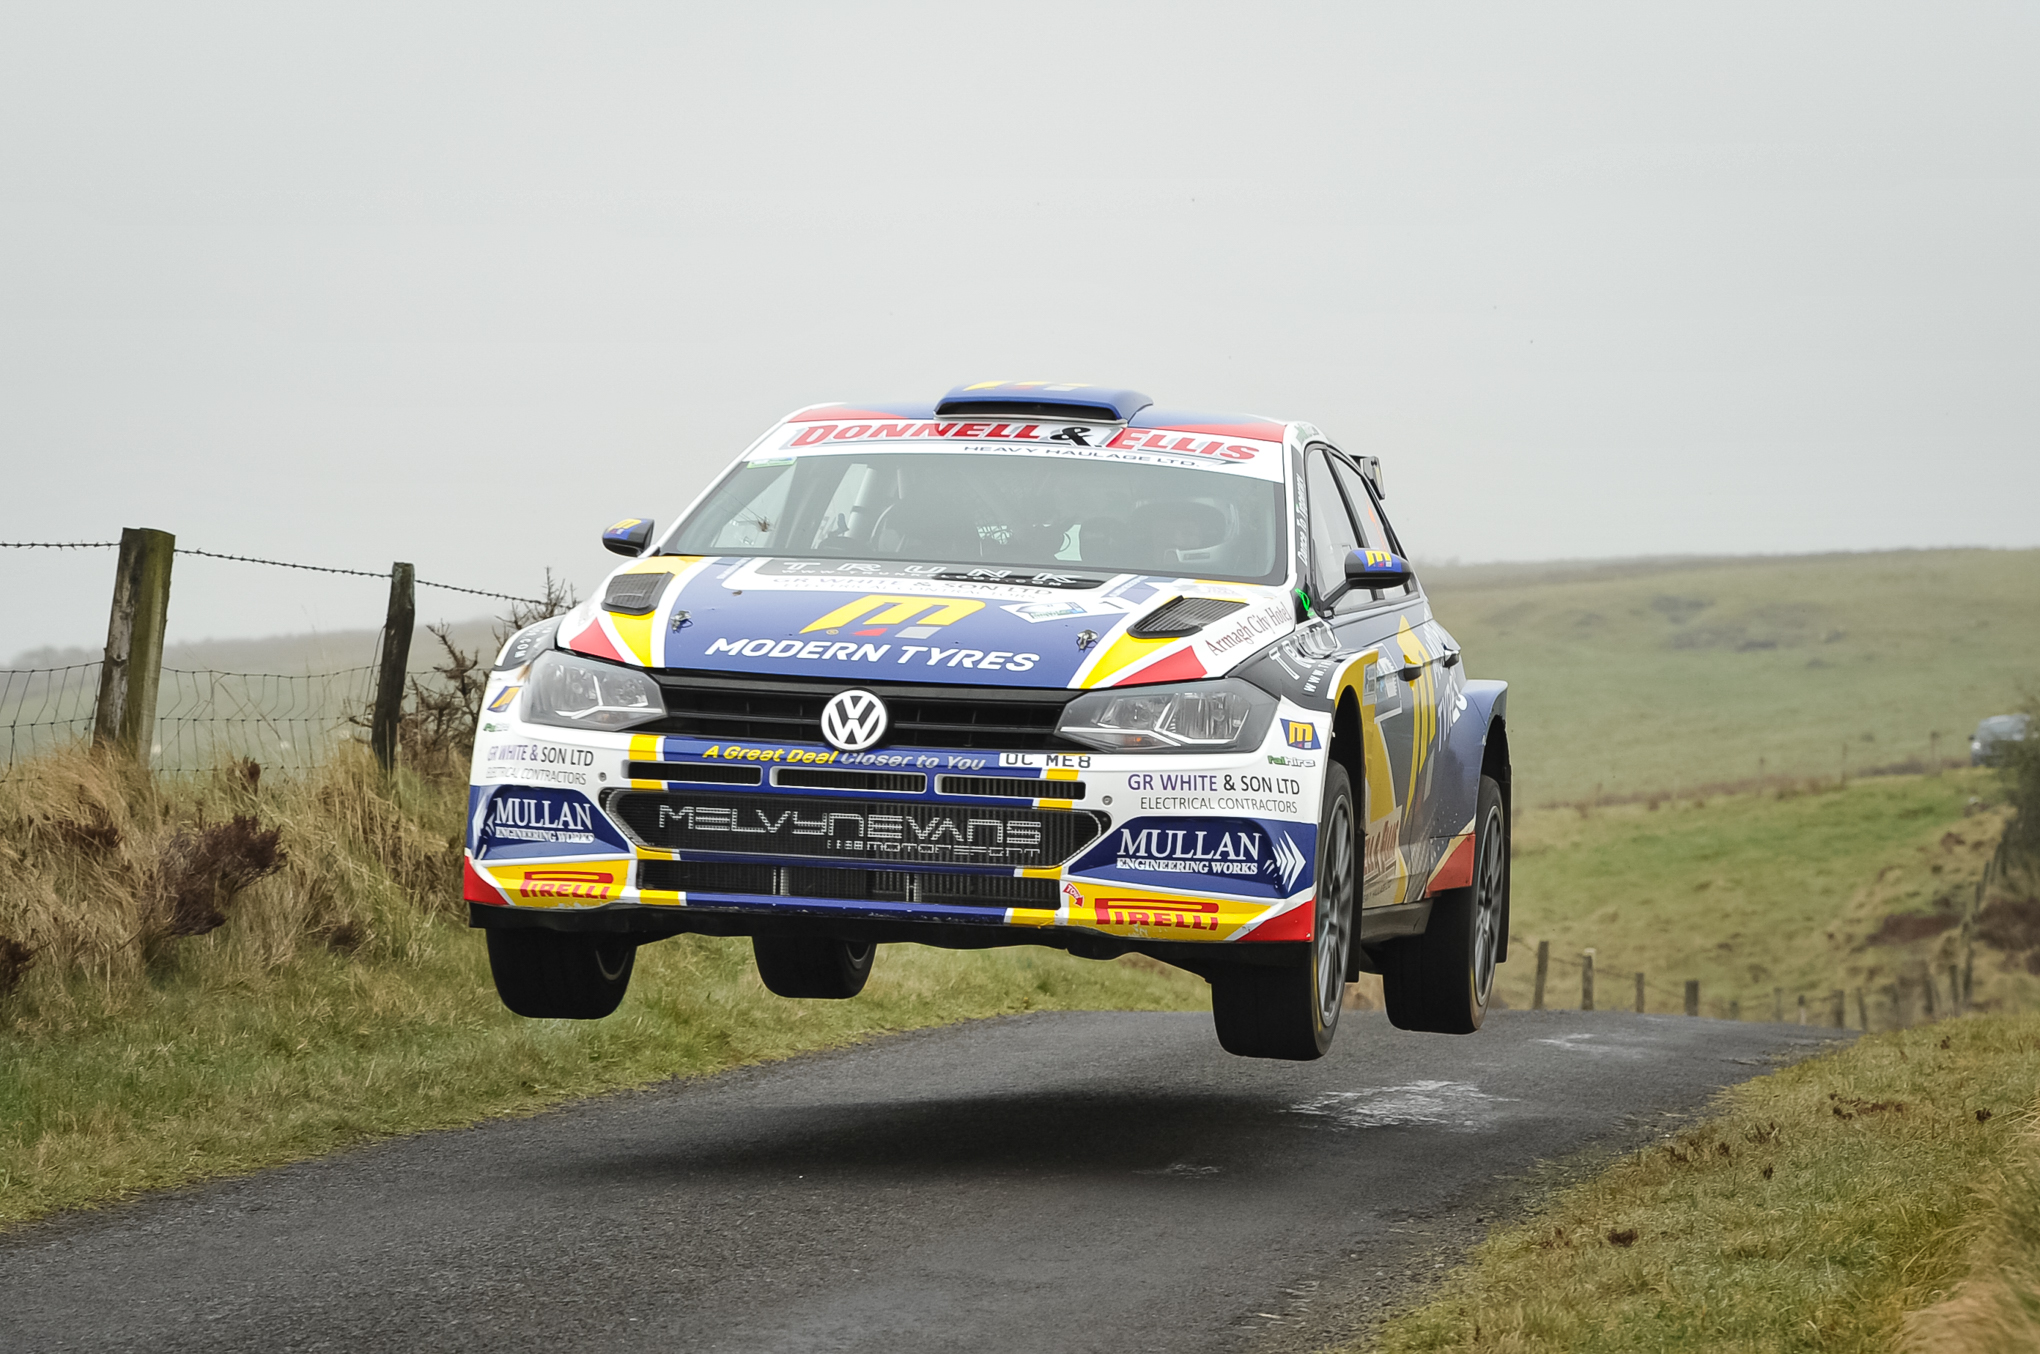 BIG NAMES CONFIRMED FOR MODERN TYRES ULSTER RALLY